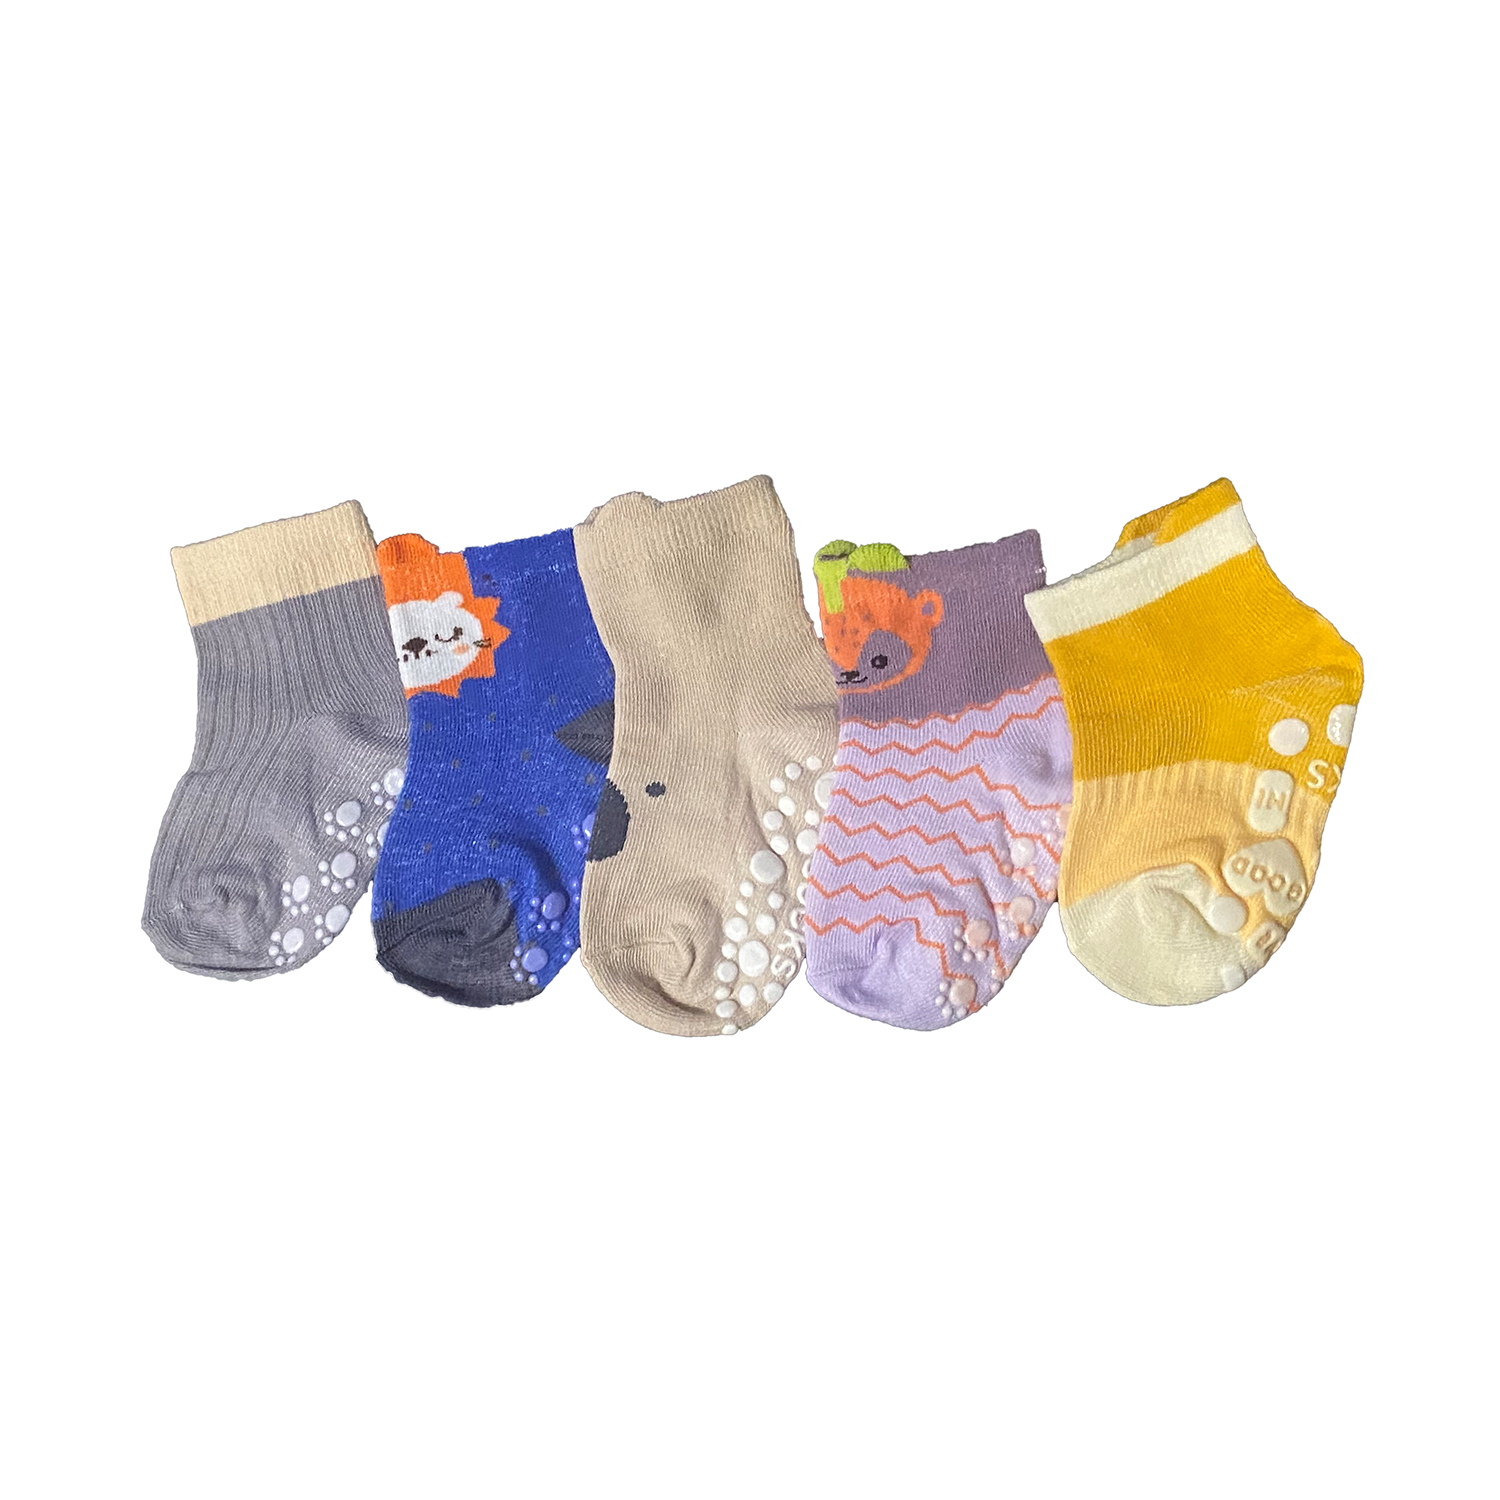 TENDSY Baby Anti Slip Crew Socks With Grips For Toddlers, Little Boys And  Girls, Infants Kids Non Skid Socks(For 6-12 Months, Pack of 5 Pairs) -  Tendsy